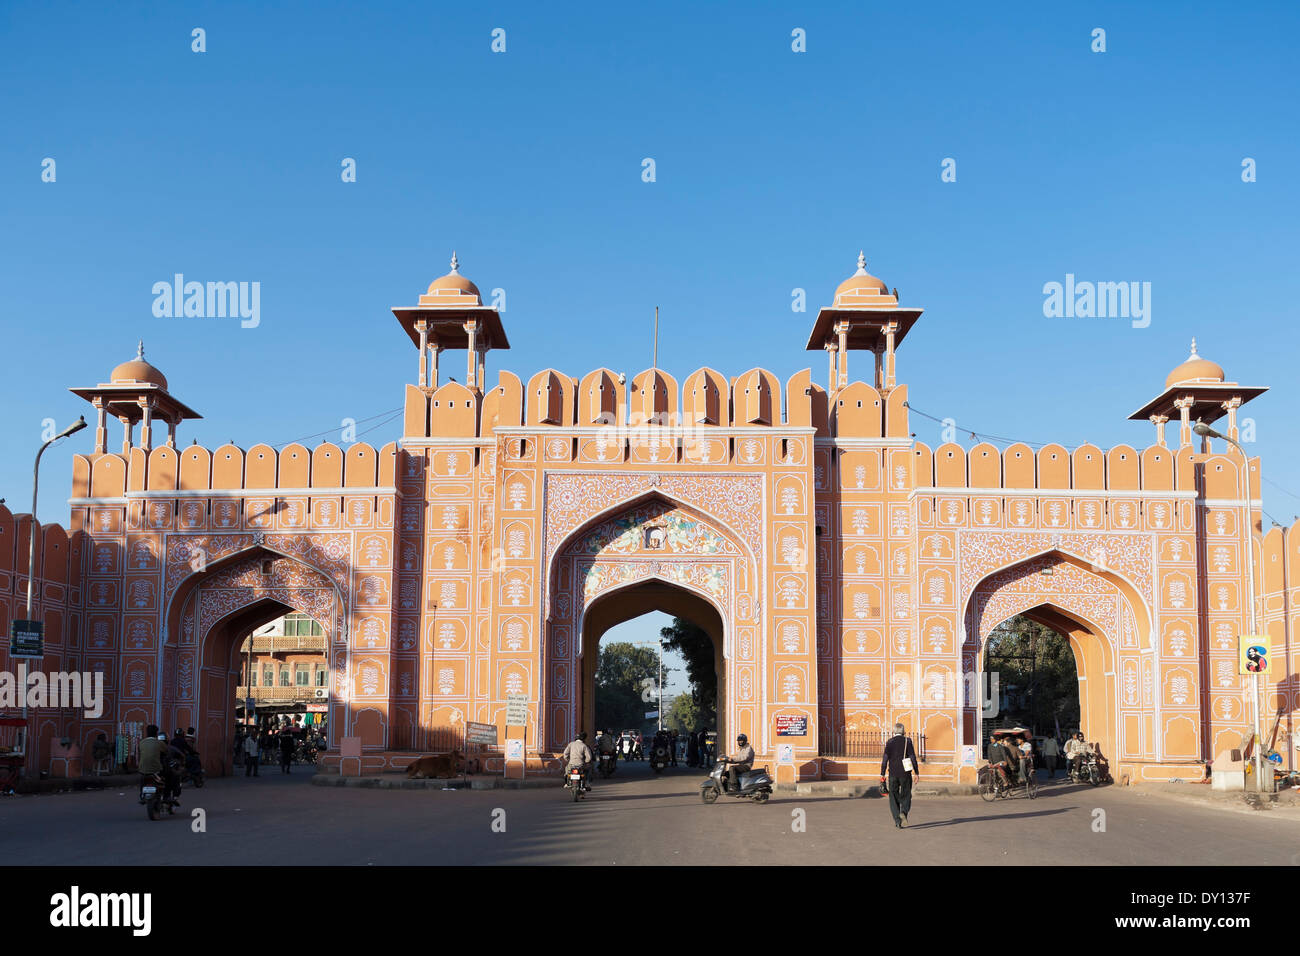 Jaipur, Rajasthan, Indic. The historic Ajmer Gate, entrance to the walled old town Stock Photo